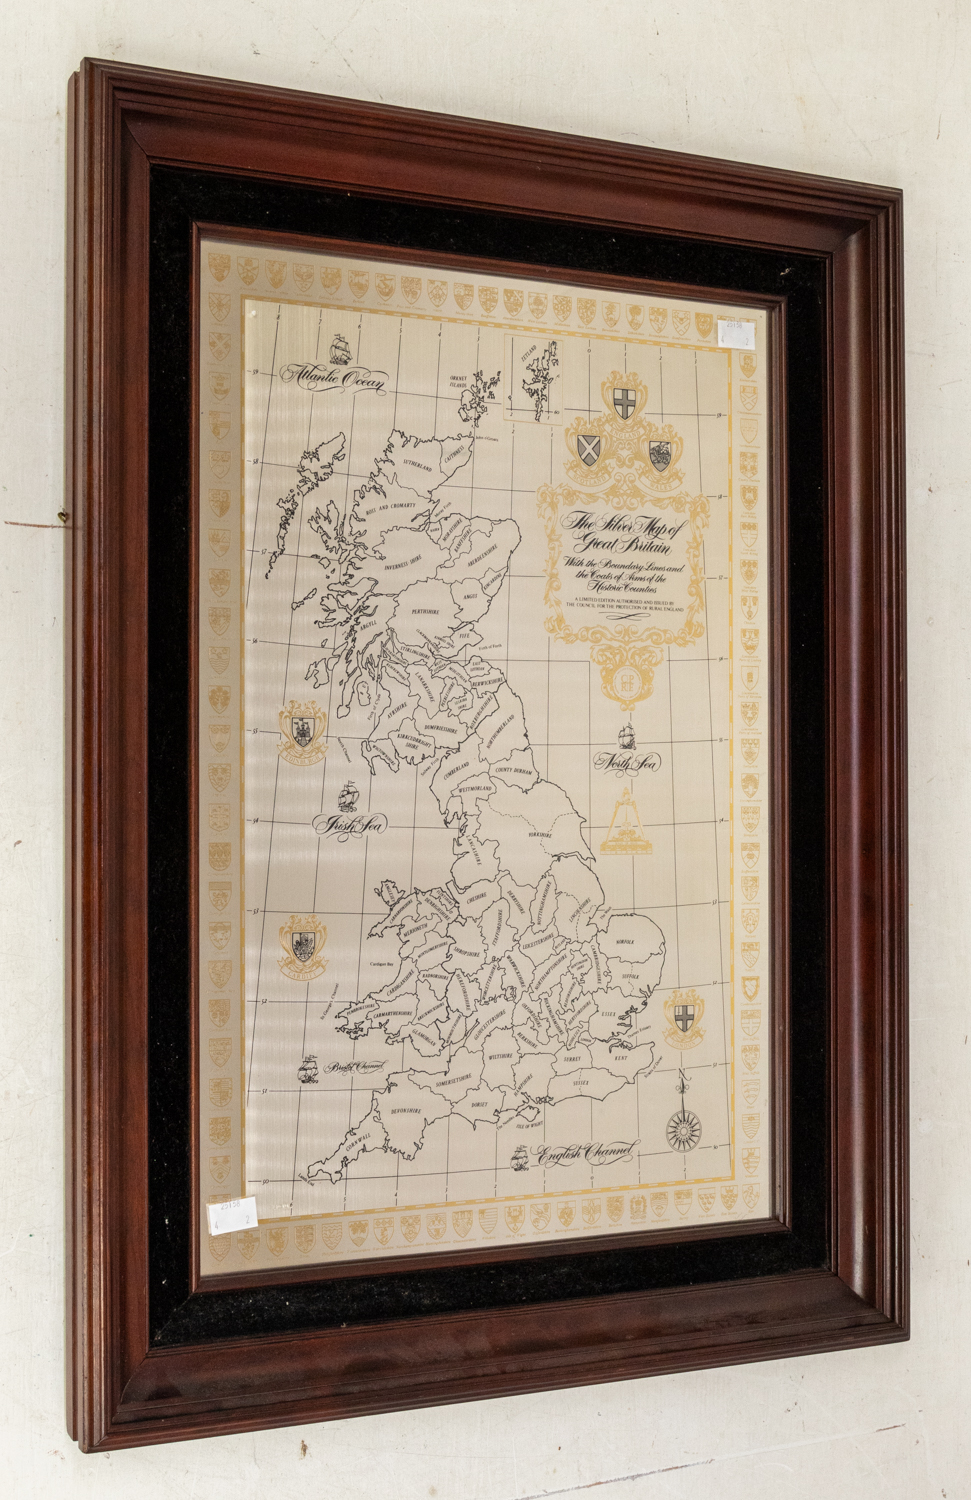 A Modern framed limited edition "The Silver Map of Great Britain", also etched with the Boundary